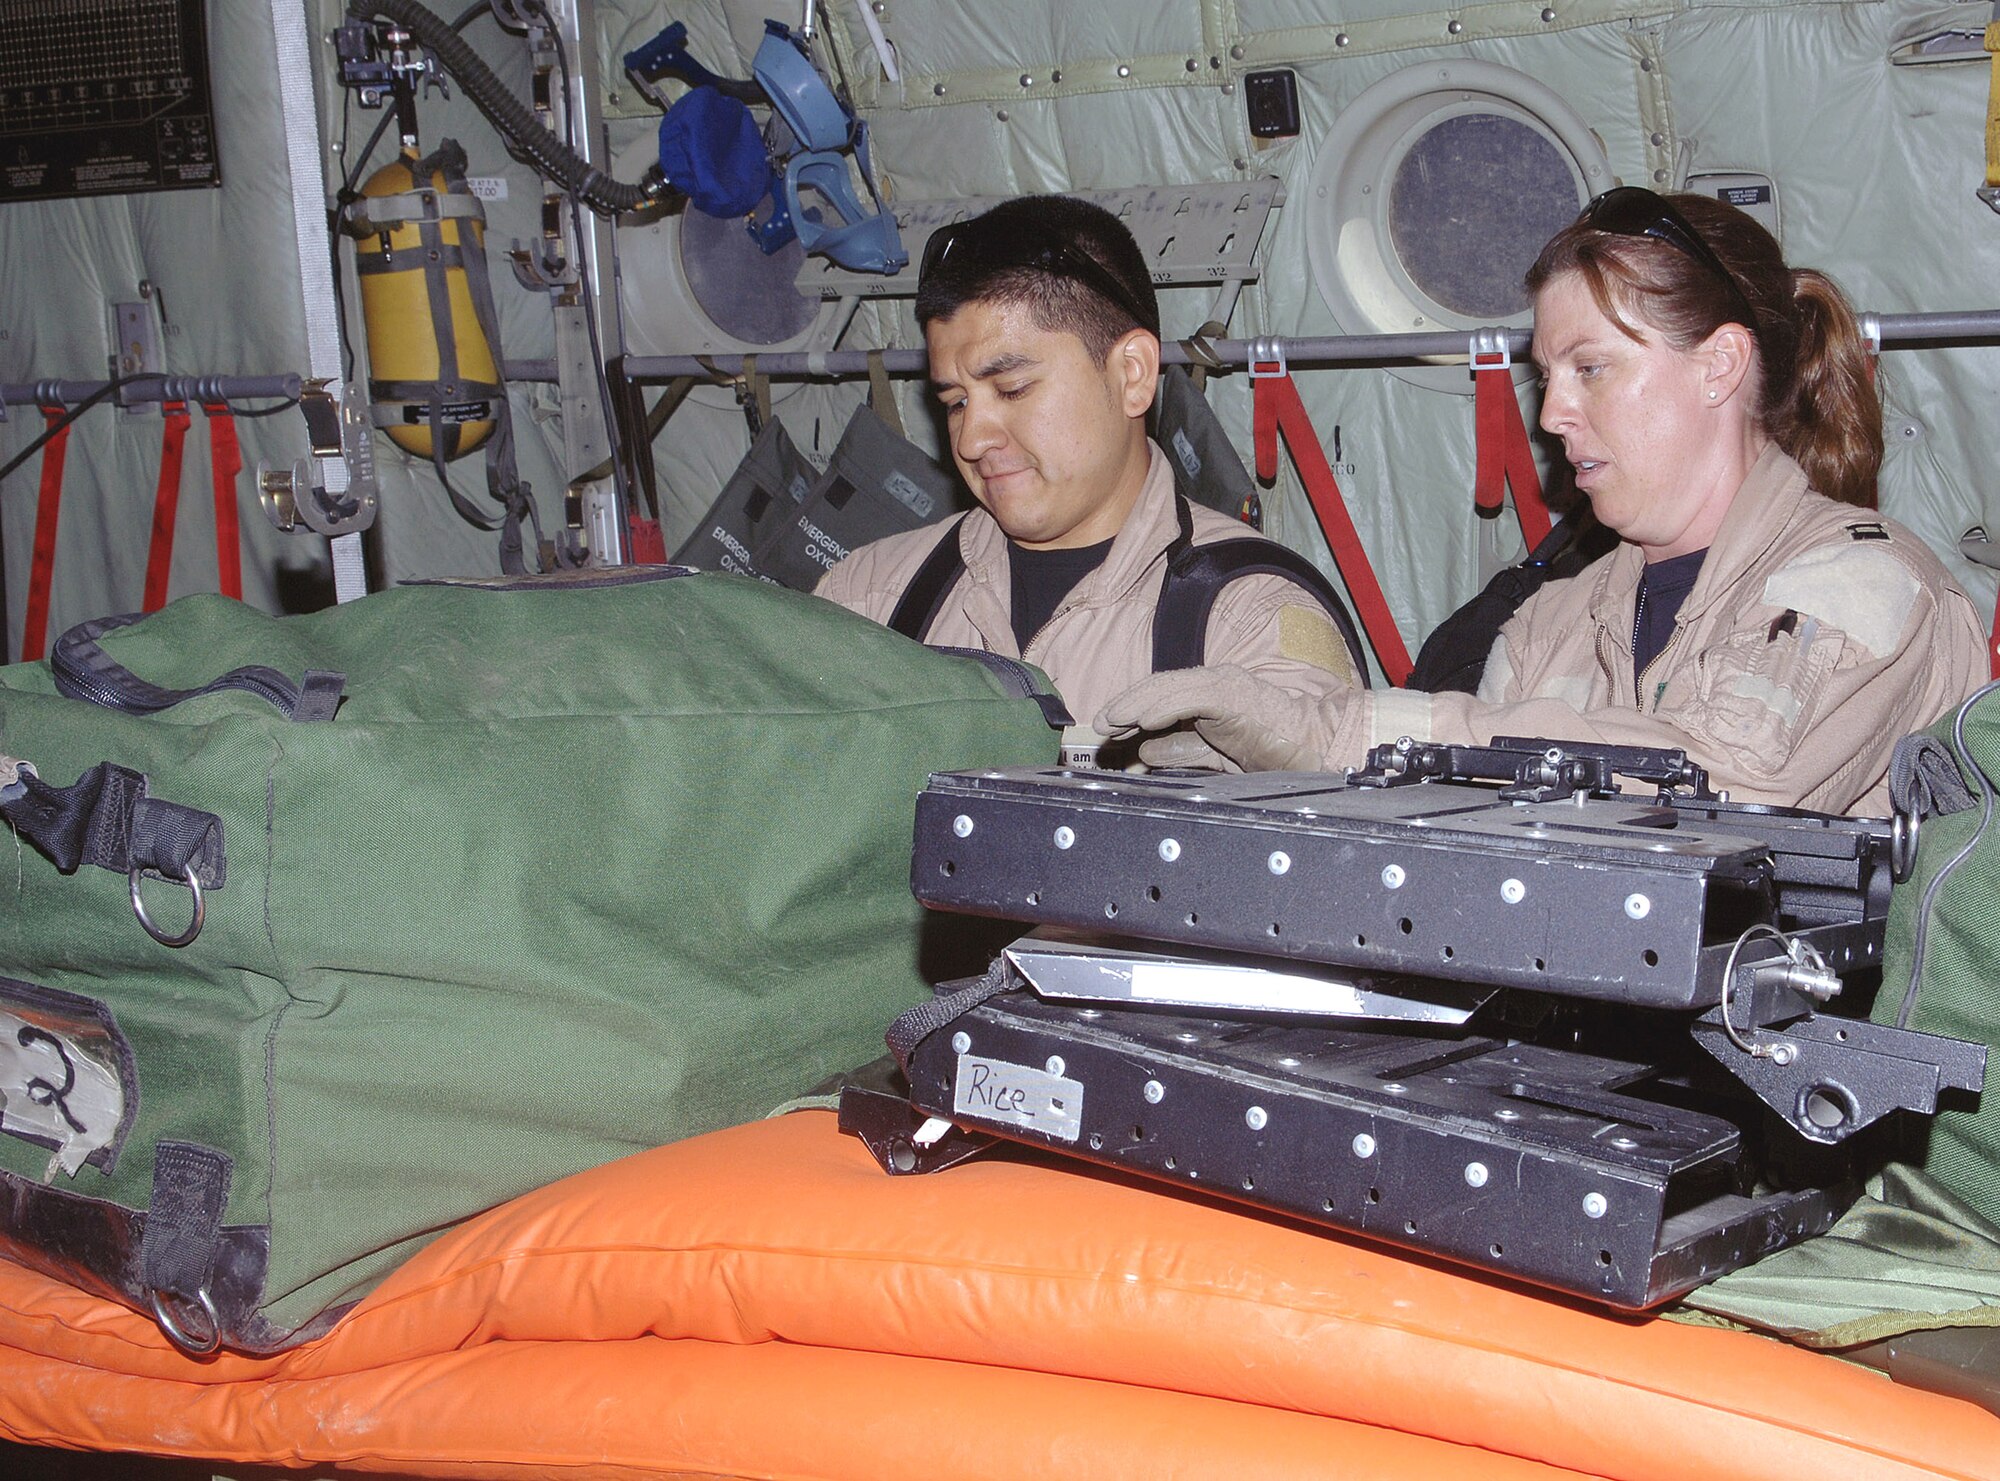 Senior Airman Roy Aguilar and Capt. Jenna Jamison inventory and prep their equipment aboard a C-130 Hercules at Bagram Air Base, Afghanistan, prior to an aeromedical evacuation mission.  Airman Aguilar is a respiratory therapist and Captain Jamison is an intensive care nurse.  They are deployed from Wilford Hall Medical Center, Lackland Air Force Base, Texas.  (U.S. Air Force photo/Staff Sgt. Craig Seals)